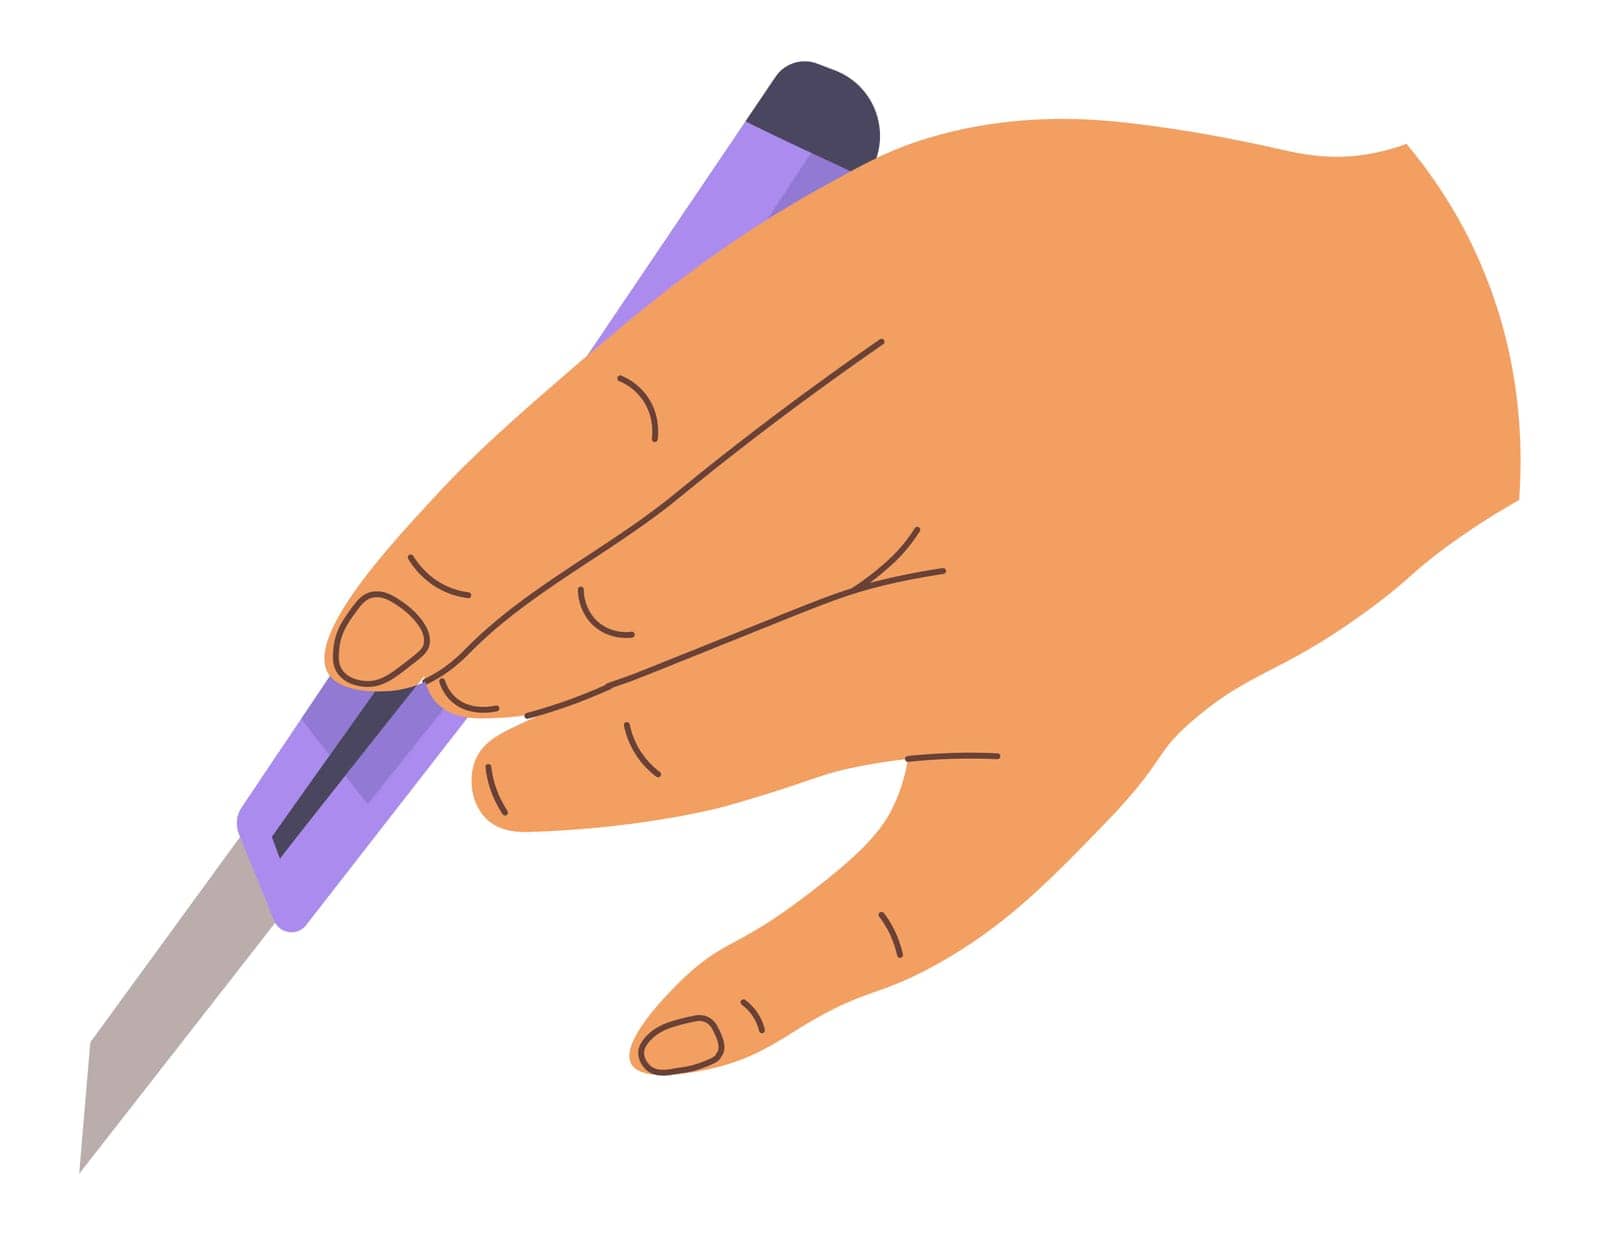 Carving knife in hands, crafts and handmade vector by Sonulkaster